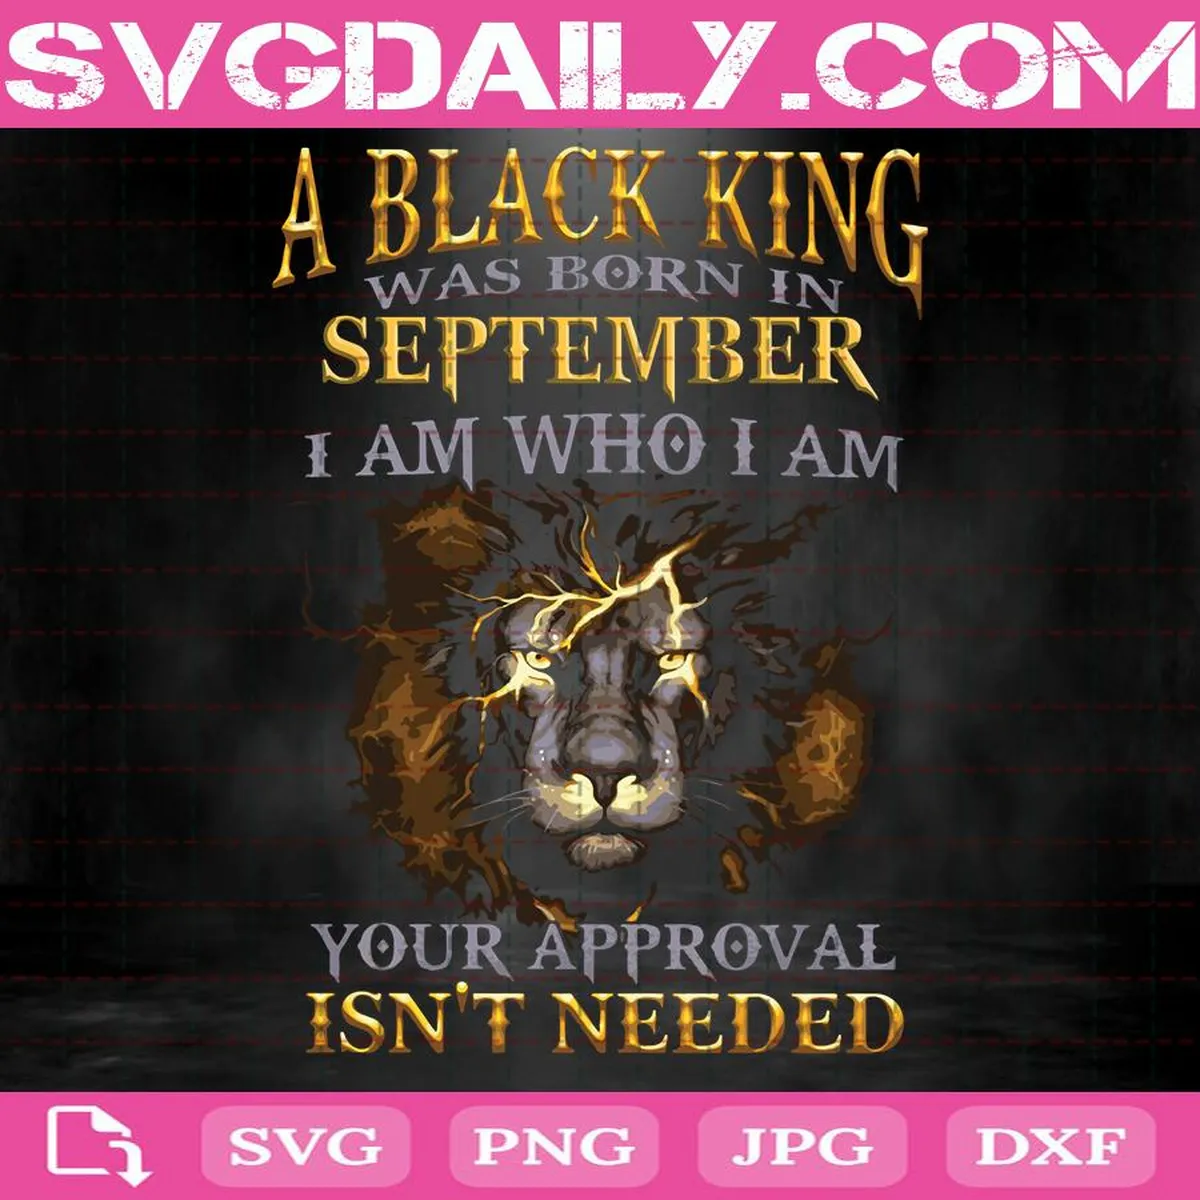 A Black King Was Born In September I Am Who I Am Your Approval Isn't Needed Svg, Black King Svg, September Svg, September King Svg, Born In September Svg, Birthday Svg